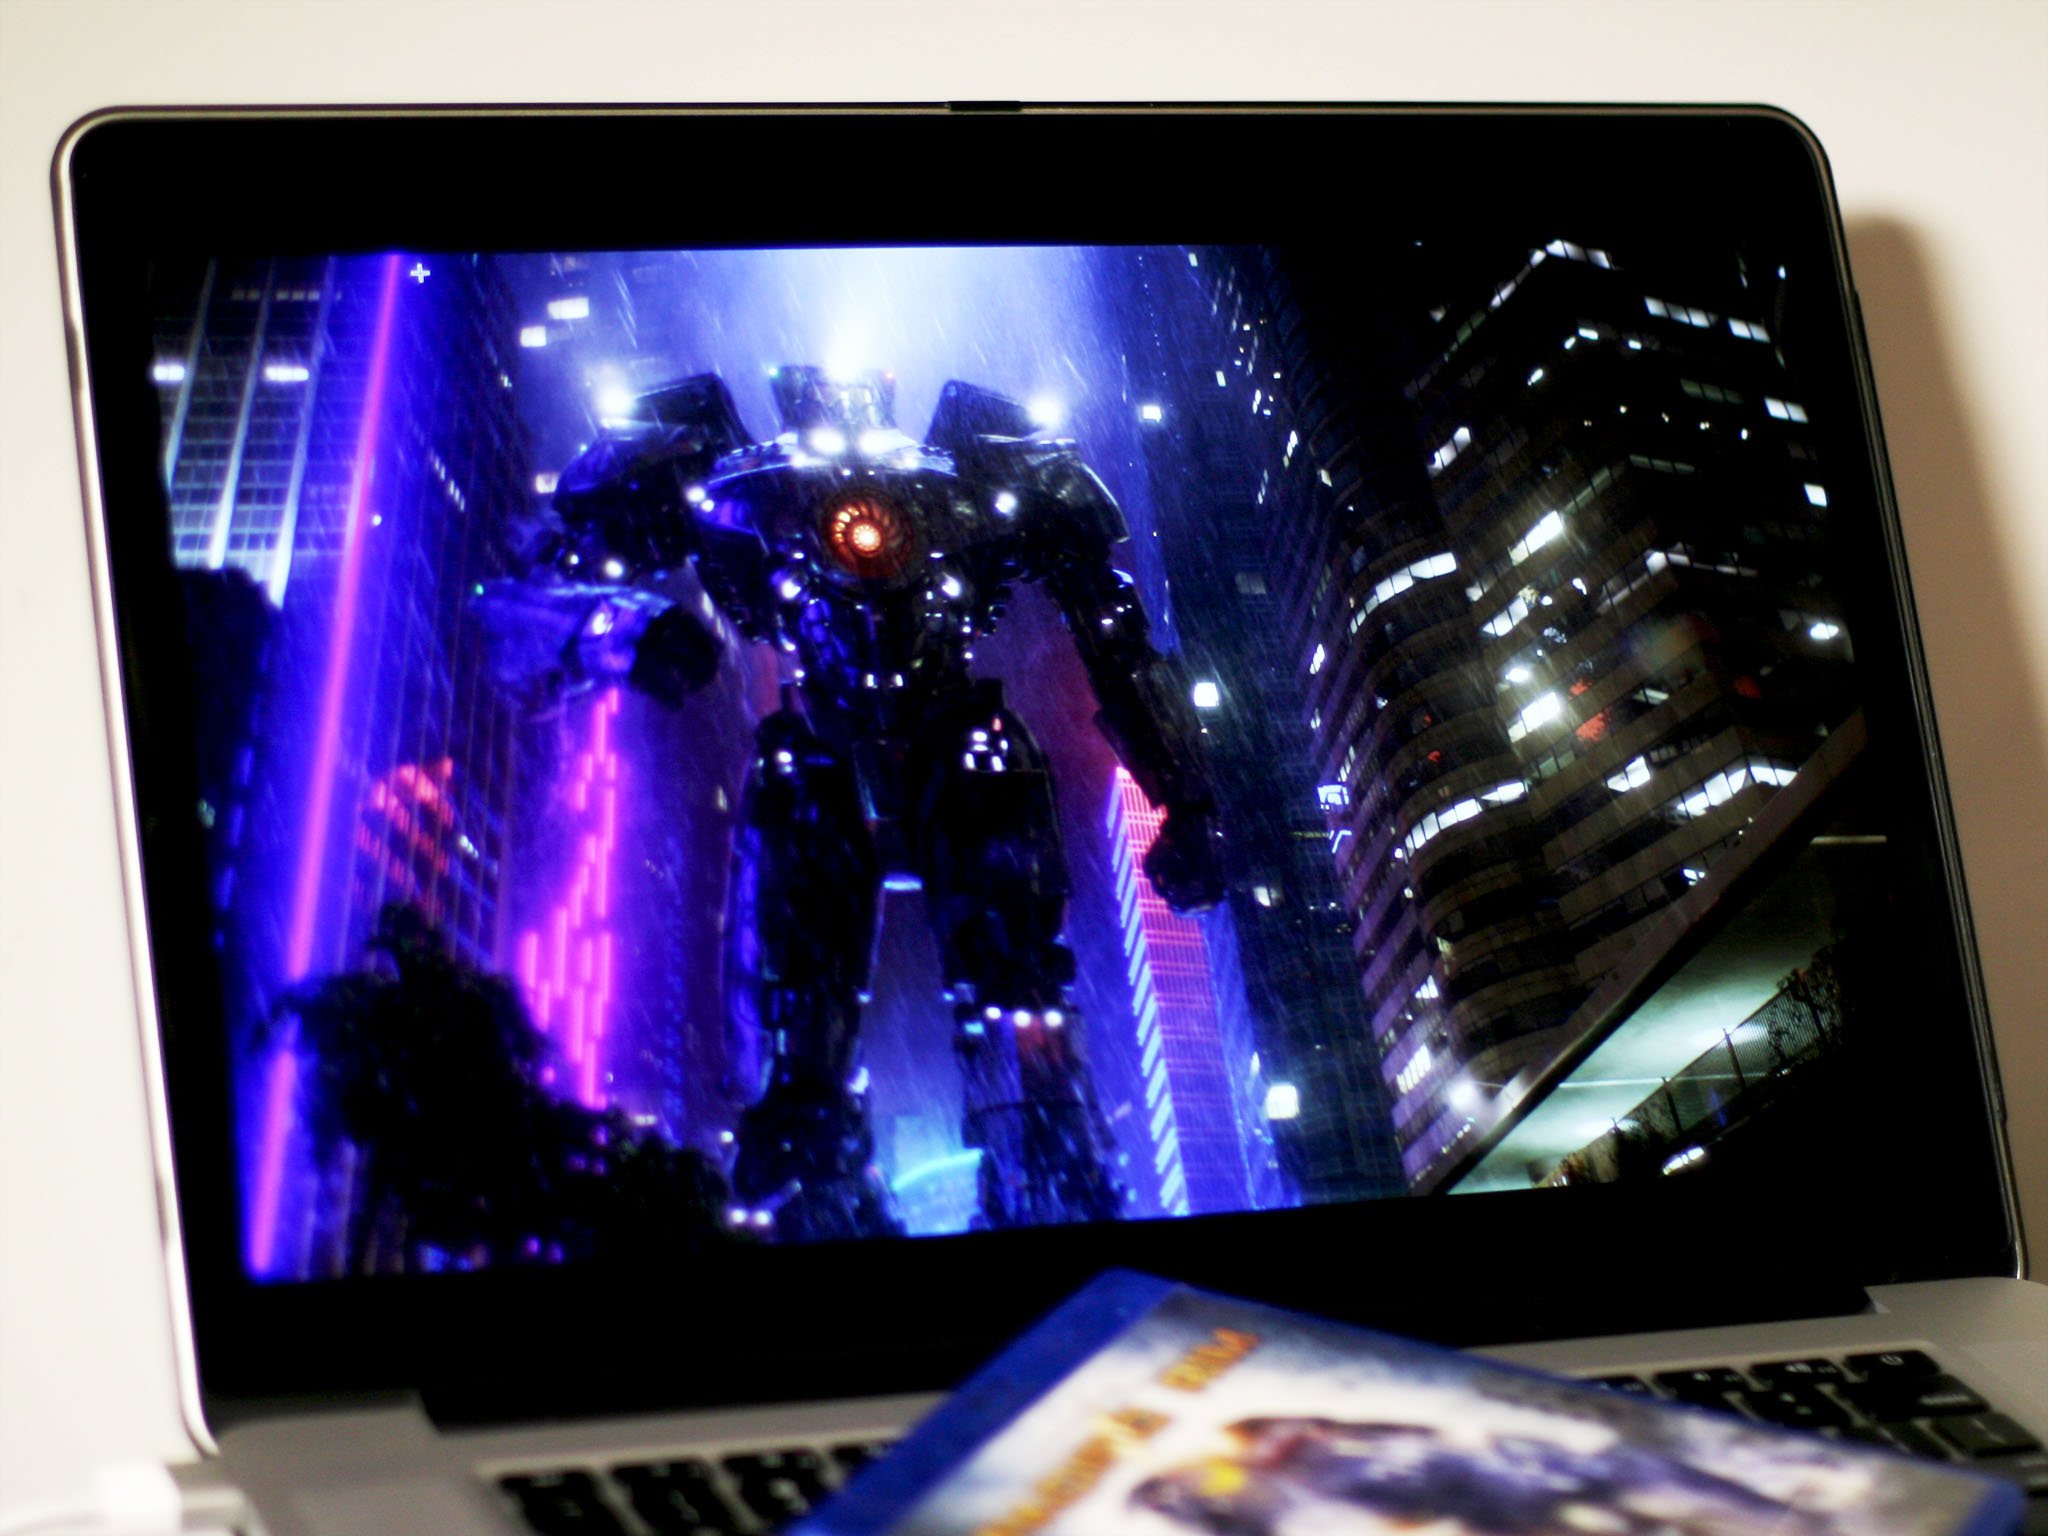 You can watch Blu-rays on your Mac. But should you? (Probably not.)